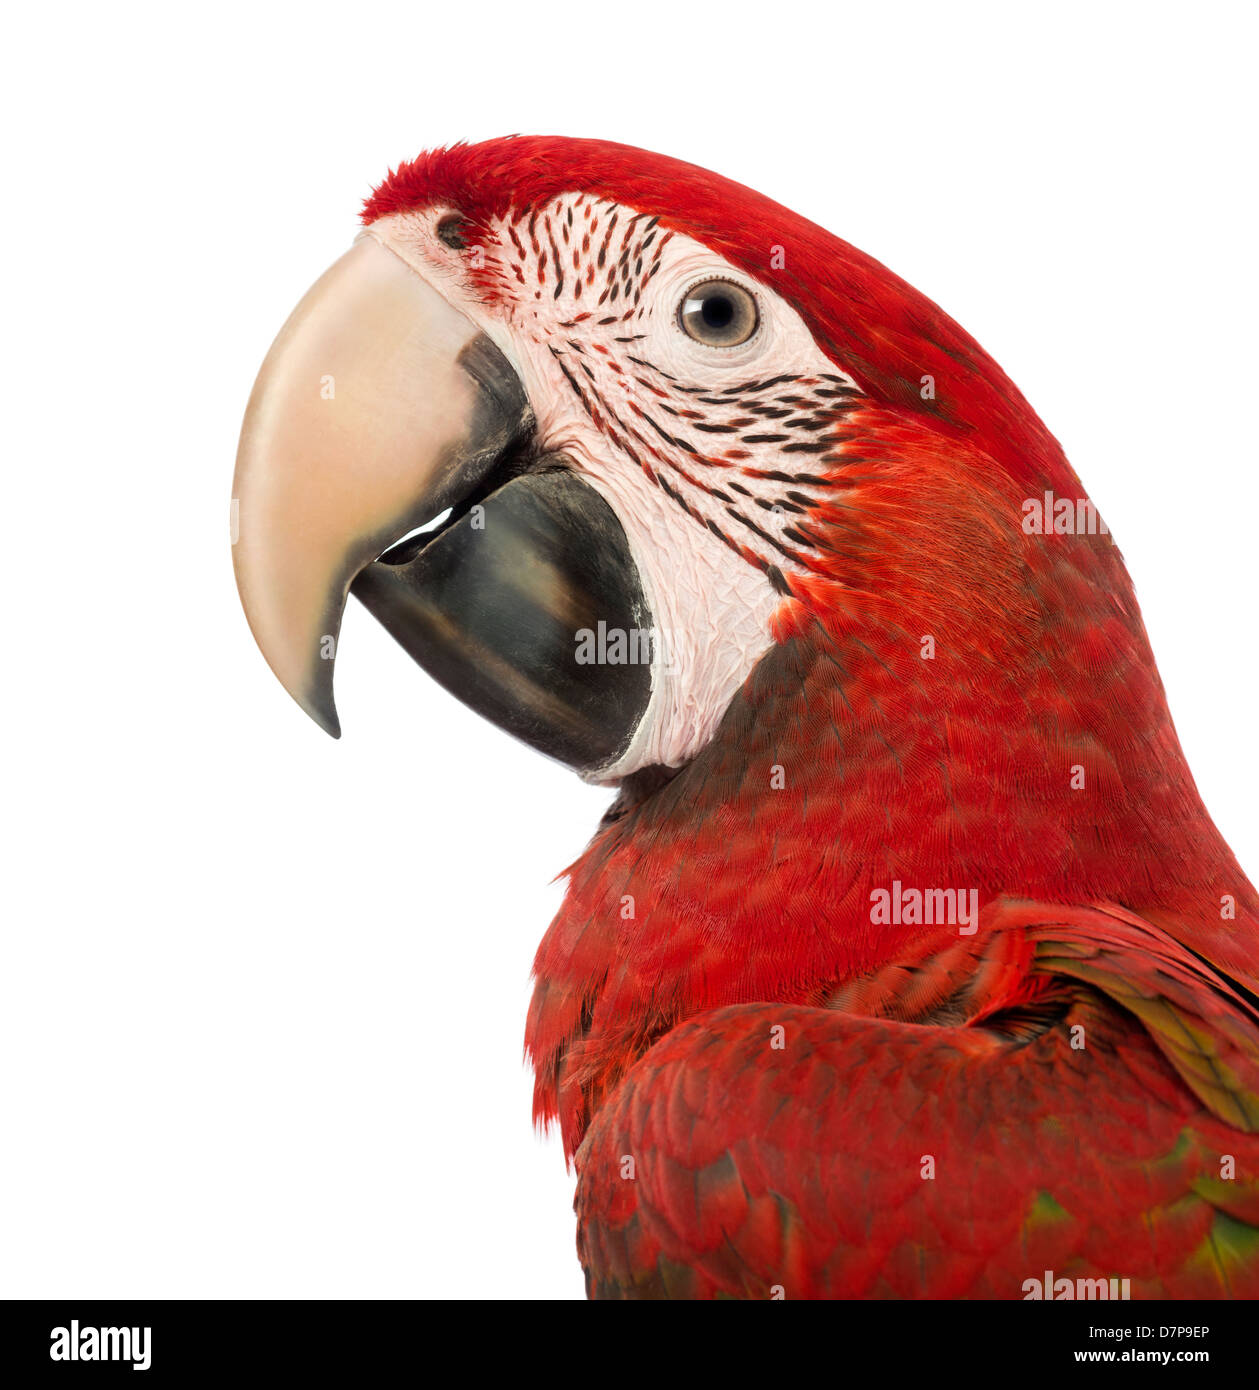 Green winged Macaw, Ara chloropterus, 1 year old, in front of a white background Stock Photo